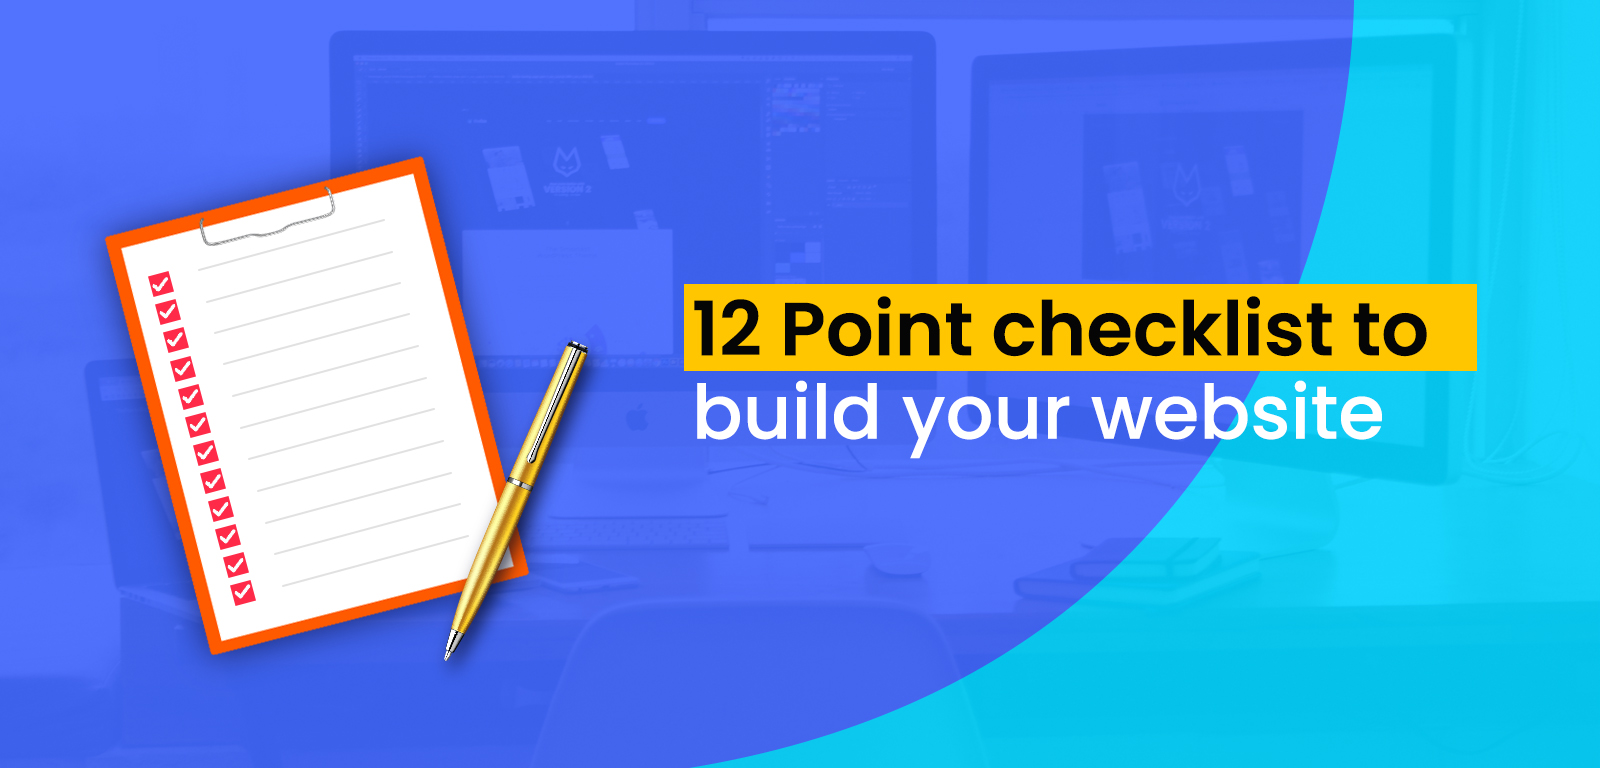 12 POINT CHECKLIST TO BUILD YOUR WEBSITE